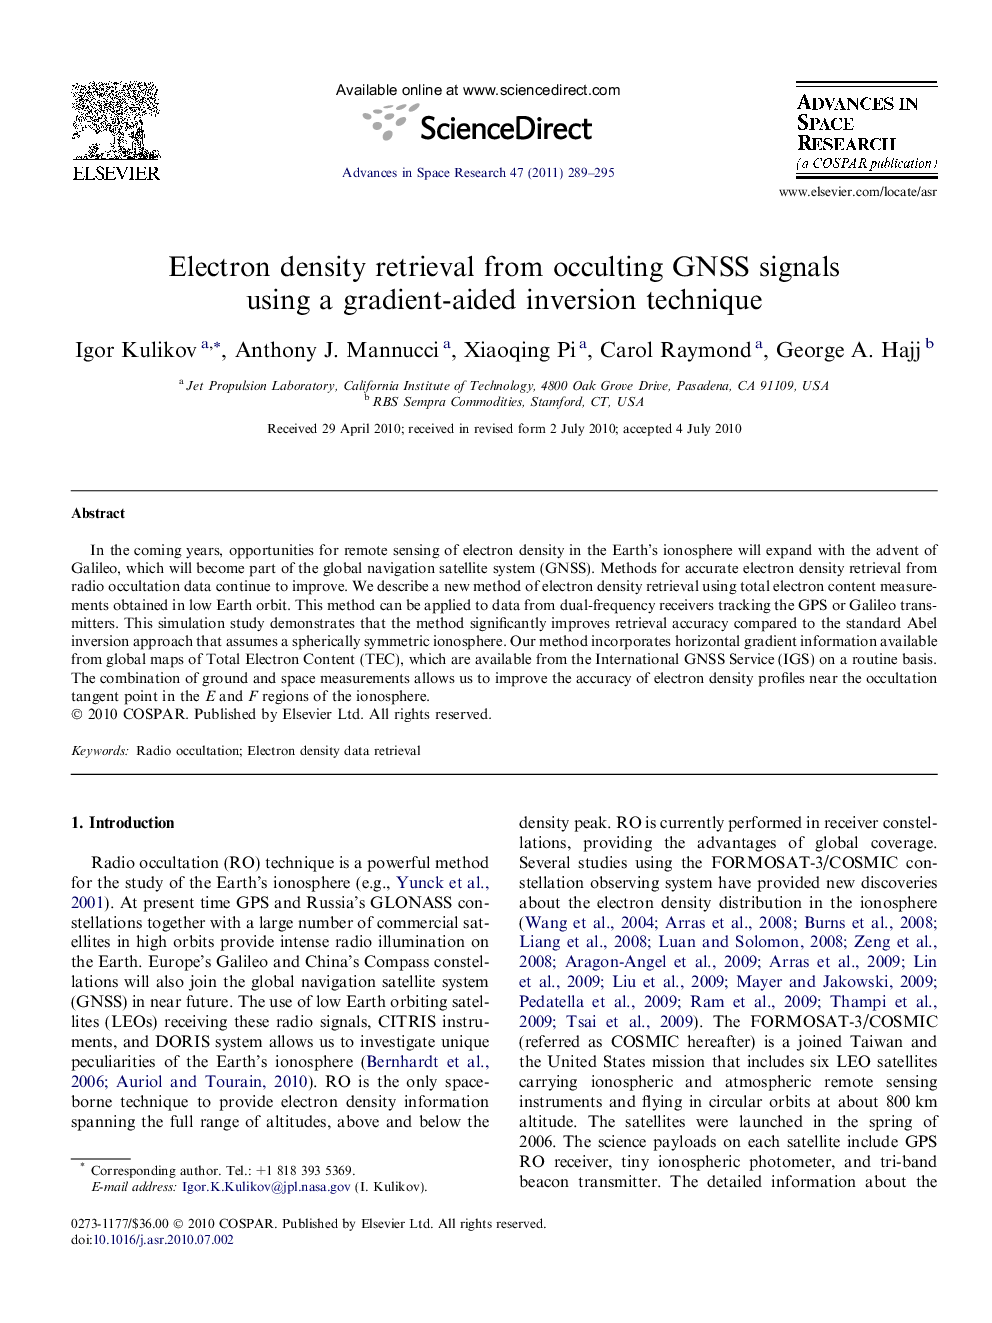 Electron density retrieval from occulting GNSS signals using a gradient-aided inversion technique